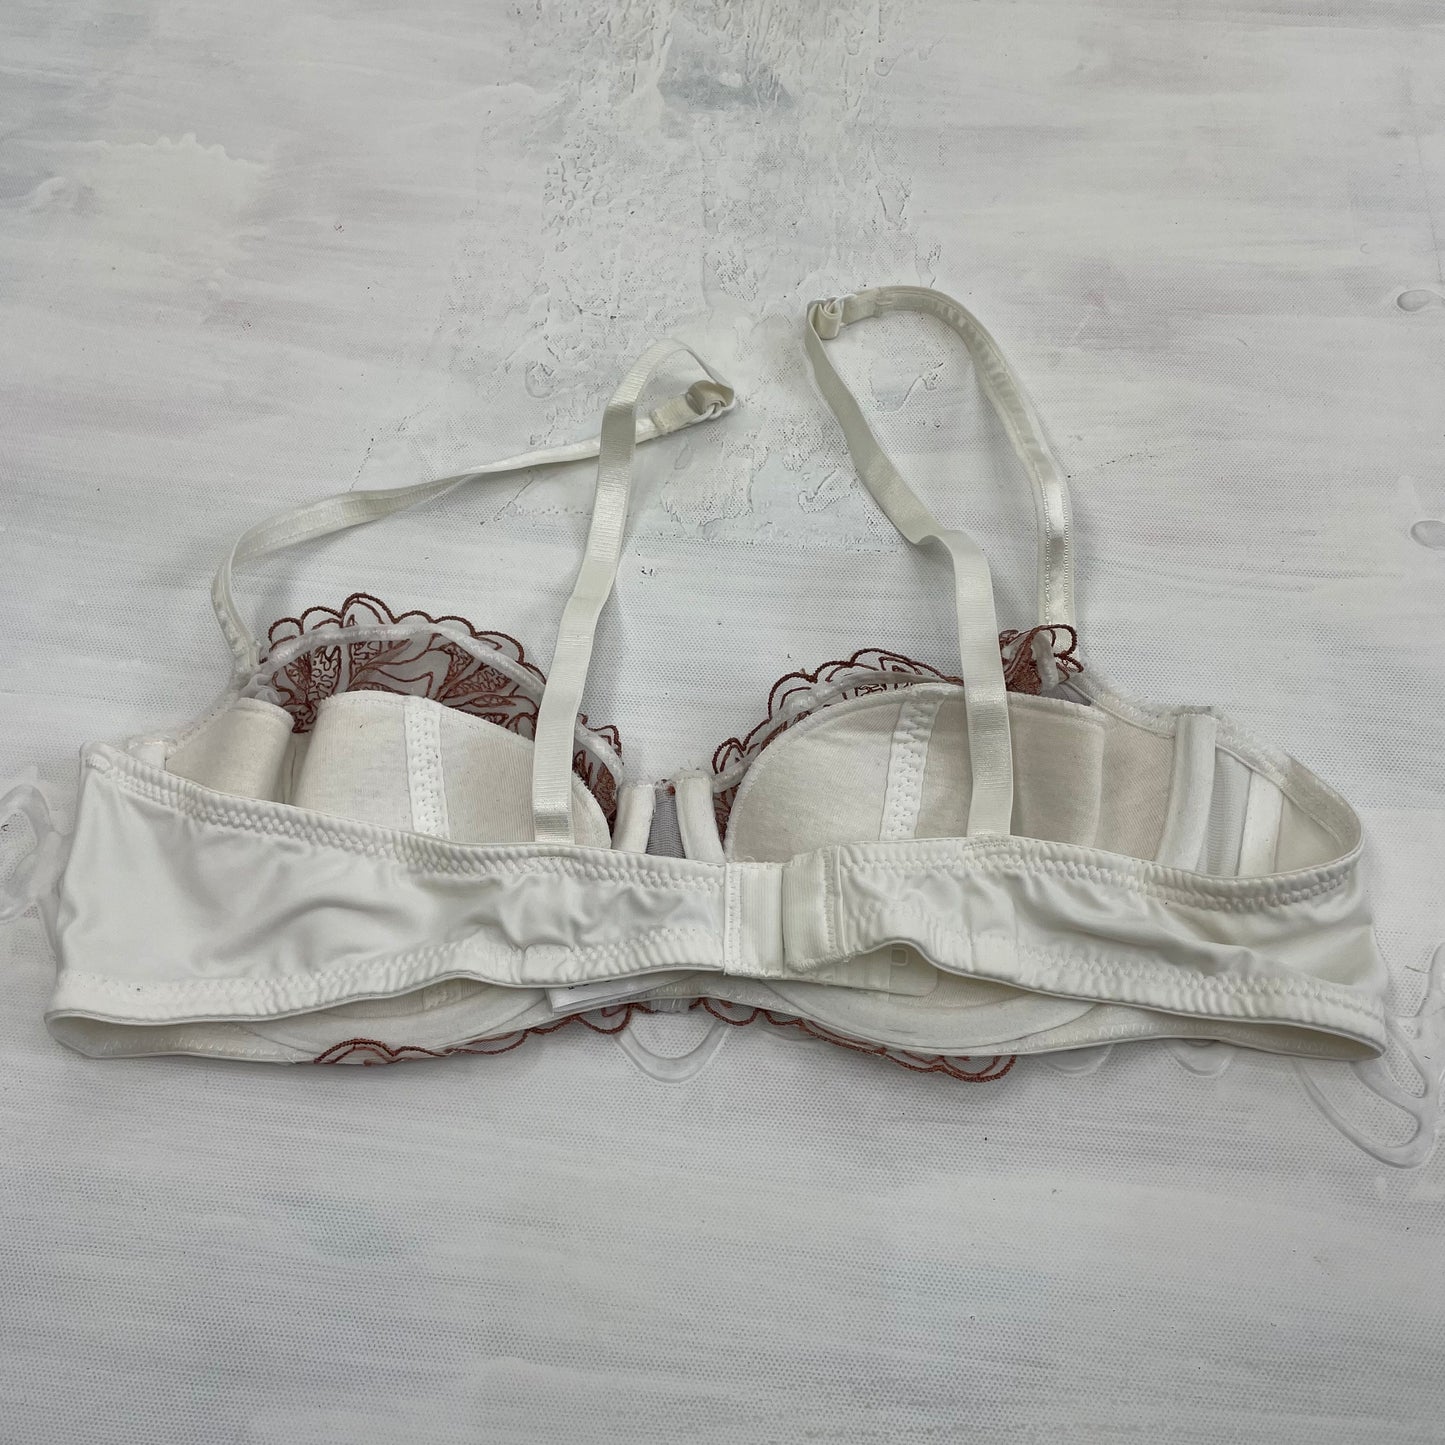 LIGHT ACADEMIA DROP | small white and brown lace underwired bra